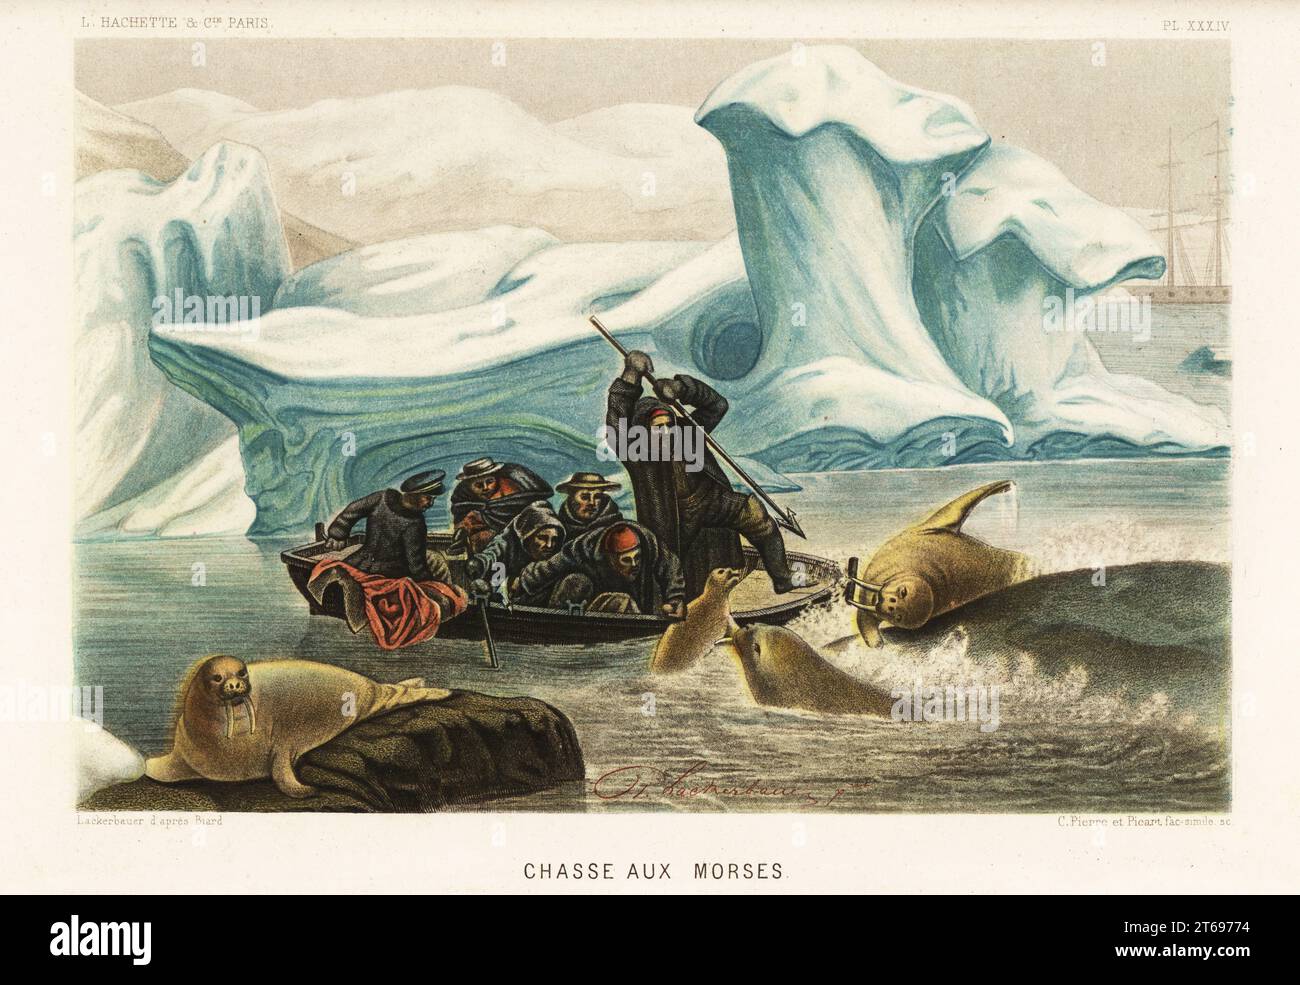 Hunting walrus, Odobenus rosmarus, in the Arctic ice floes. Whalers on a small boat hunting with harpoon. Chasses aux morses. Chromolithograph by C. Pierre and Bernard Picart Pierre Lackerbauer after landscape artist François-Auguste Biard from Alfred Fredols Le Monde de la Mer, the World of the Sea, edited by Olivier Fredol, Librairie Hachette et. Cie., Paris, 1881. Alfred Fredol was the pseudonym of French zoologist and botanist Alfred Moquin-Tandon, 1804-1863. Stock Photo